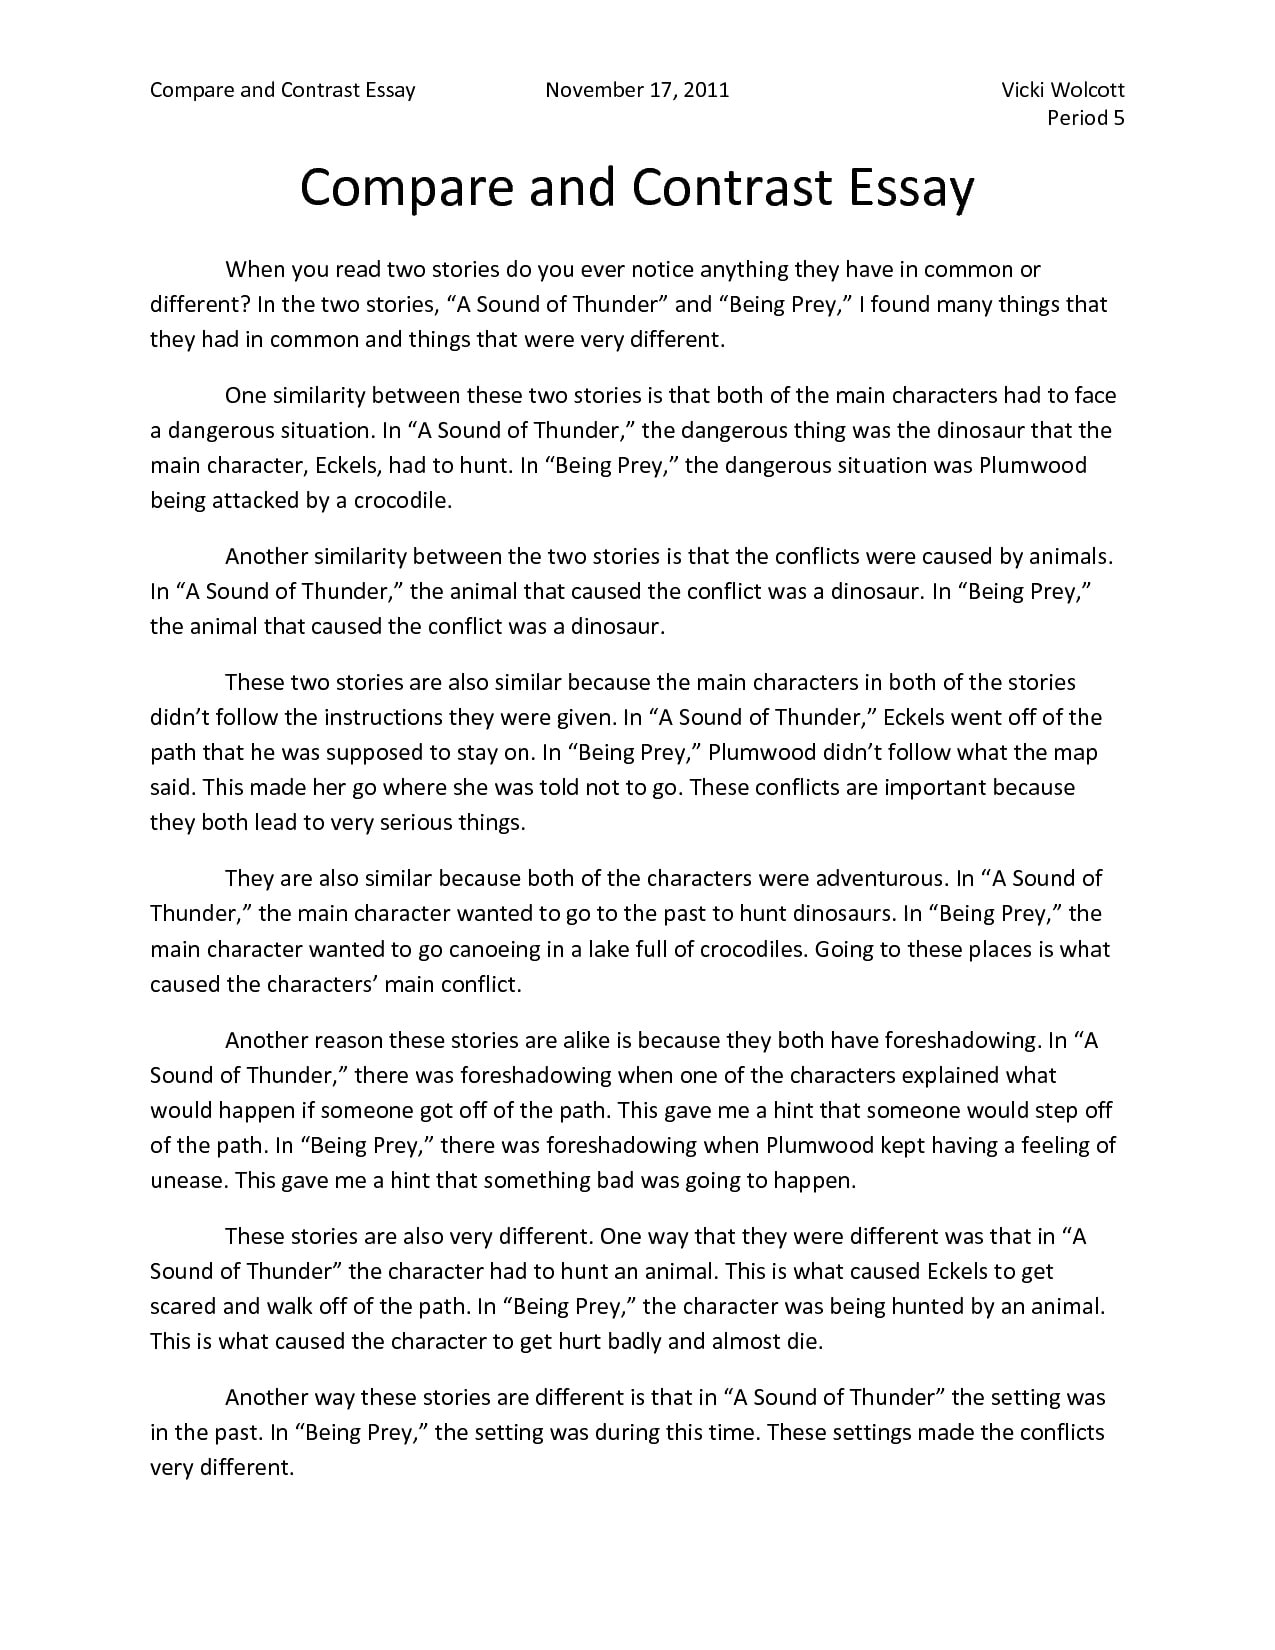 Examples of compare and contrast essays for college